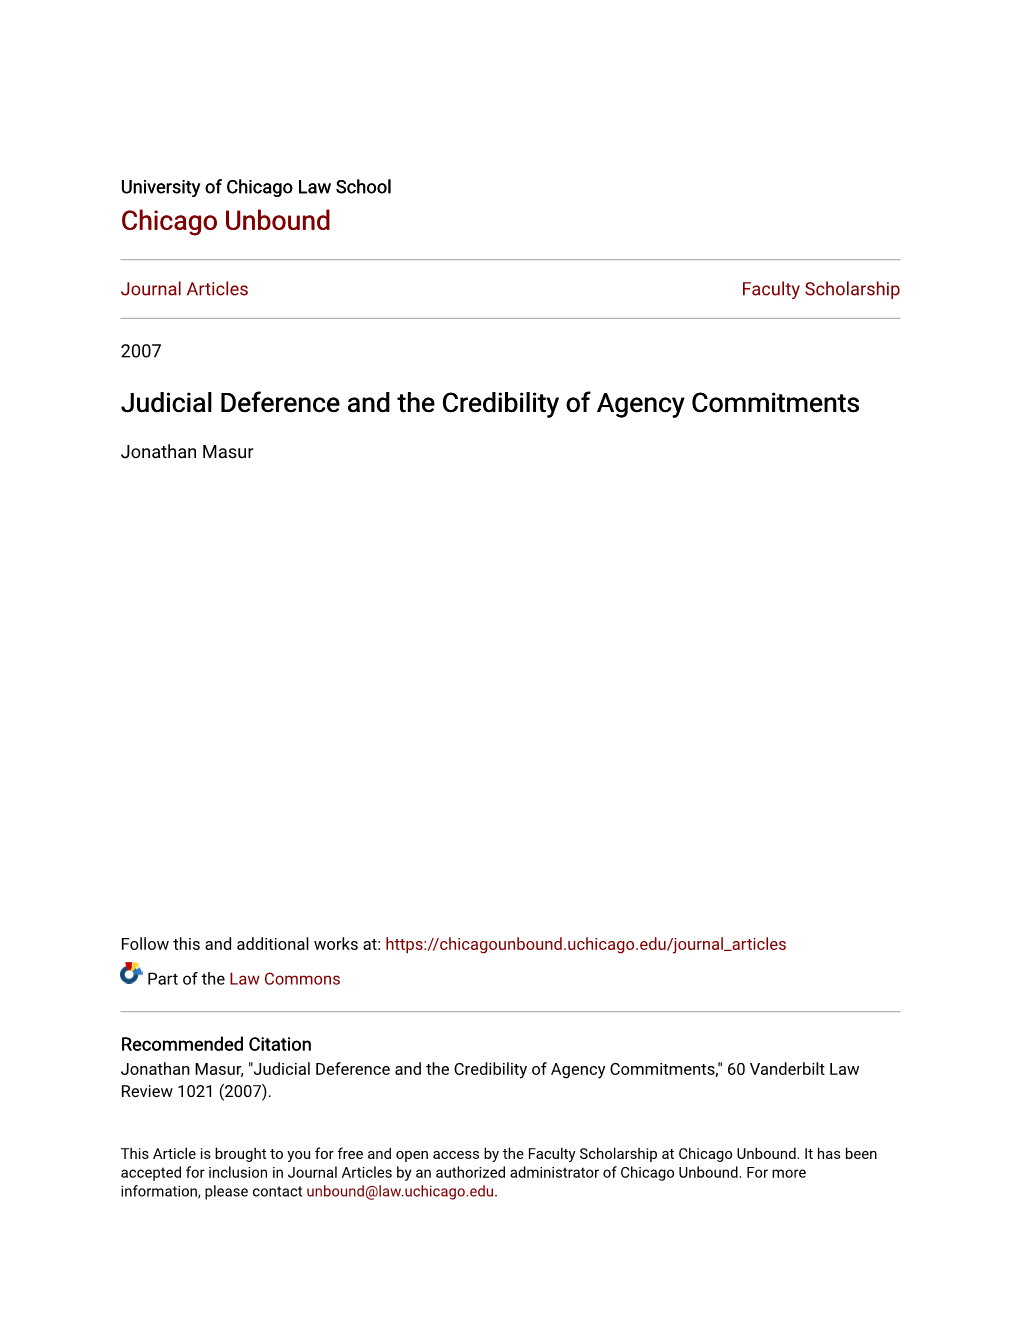 Judicial Deference and the Credibility of Agency Commitments